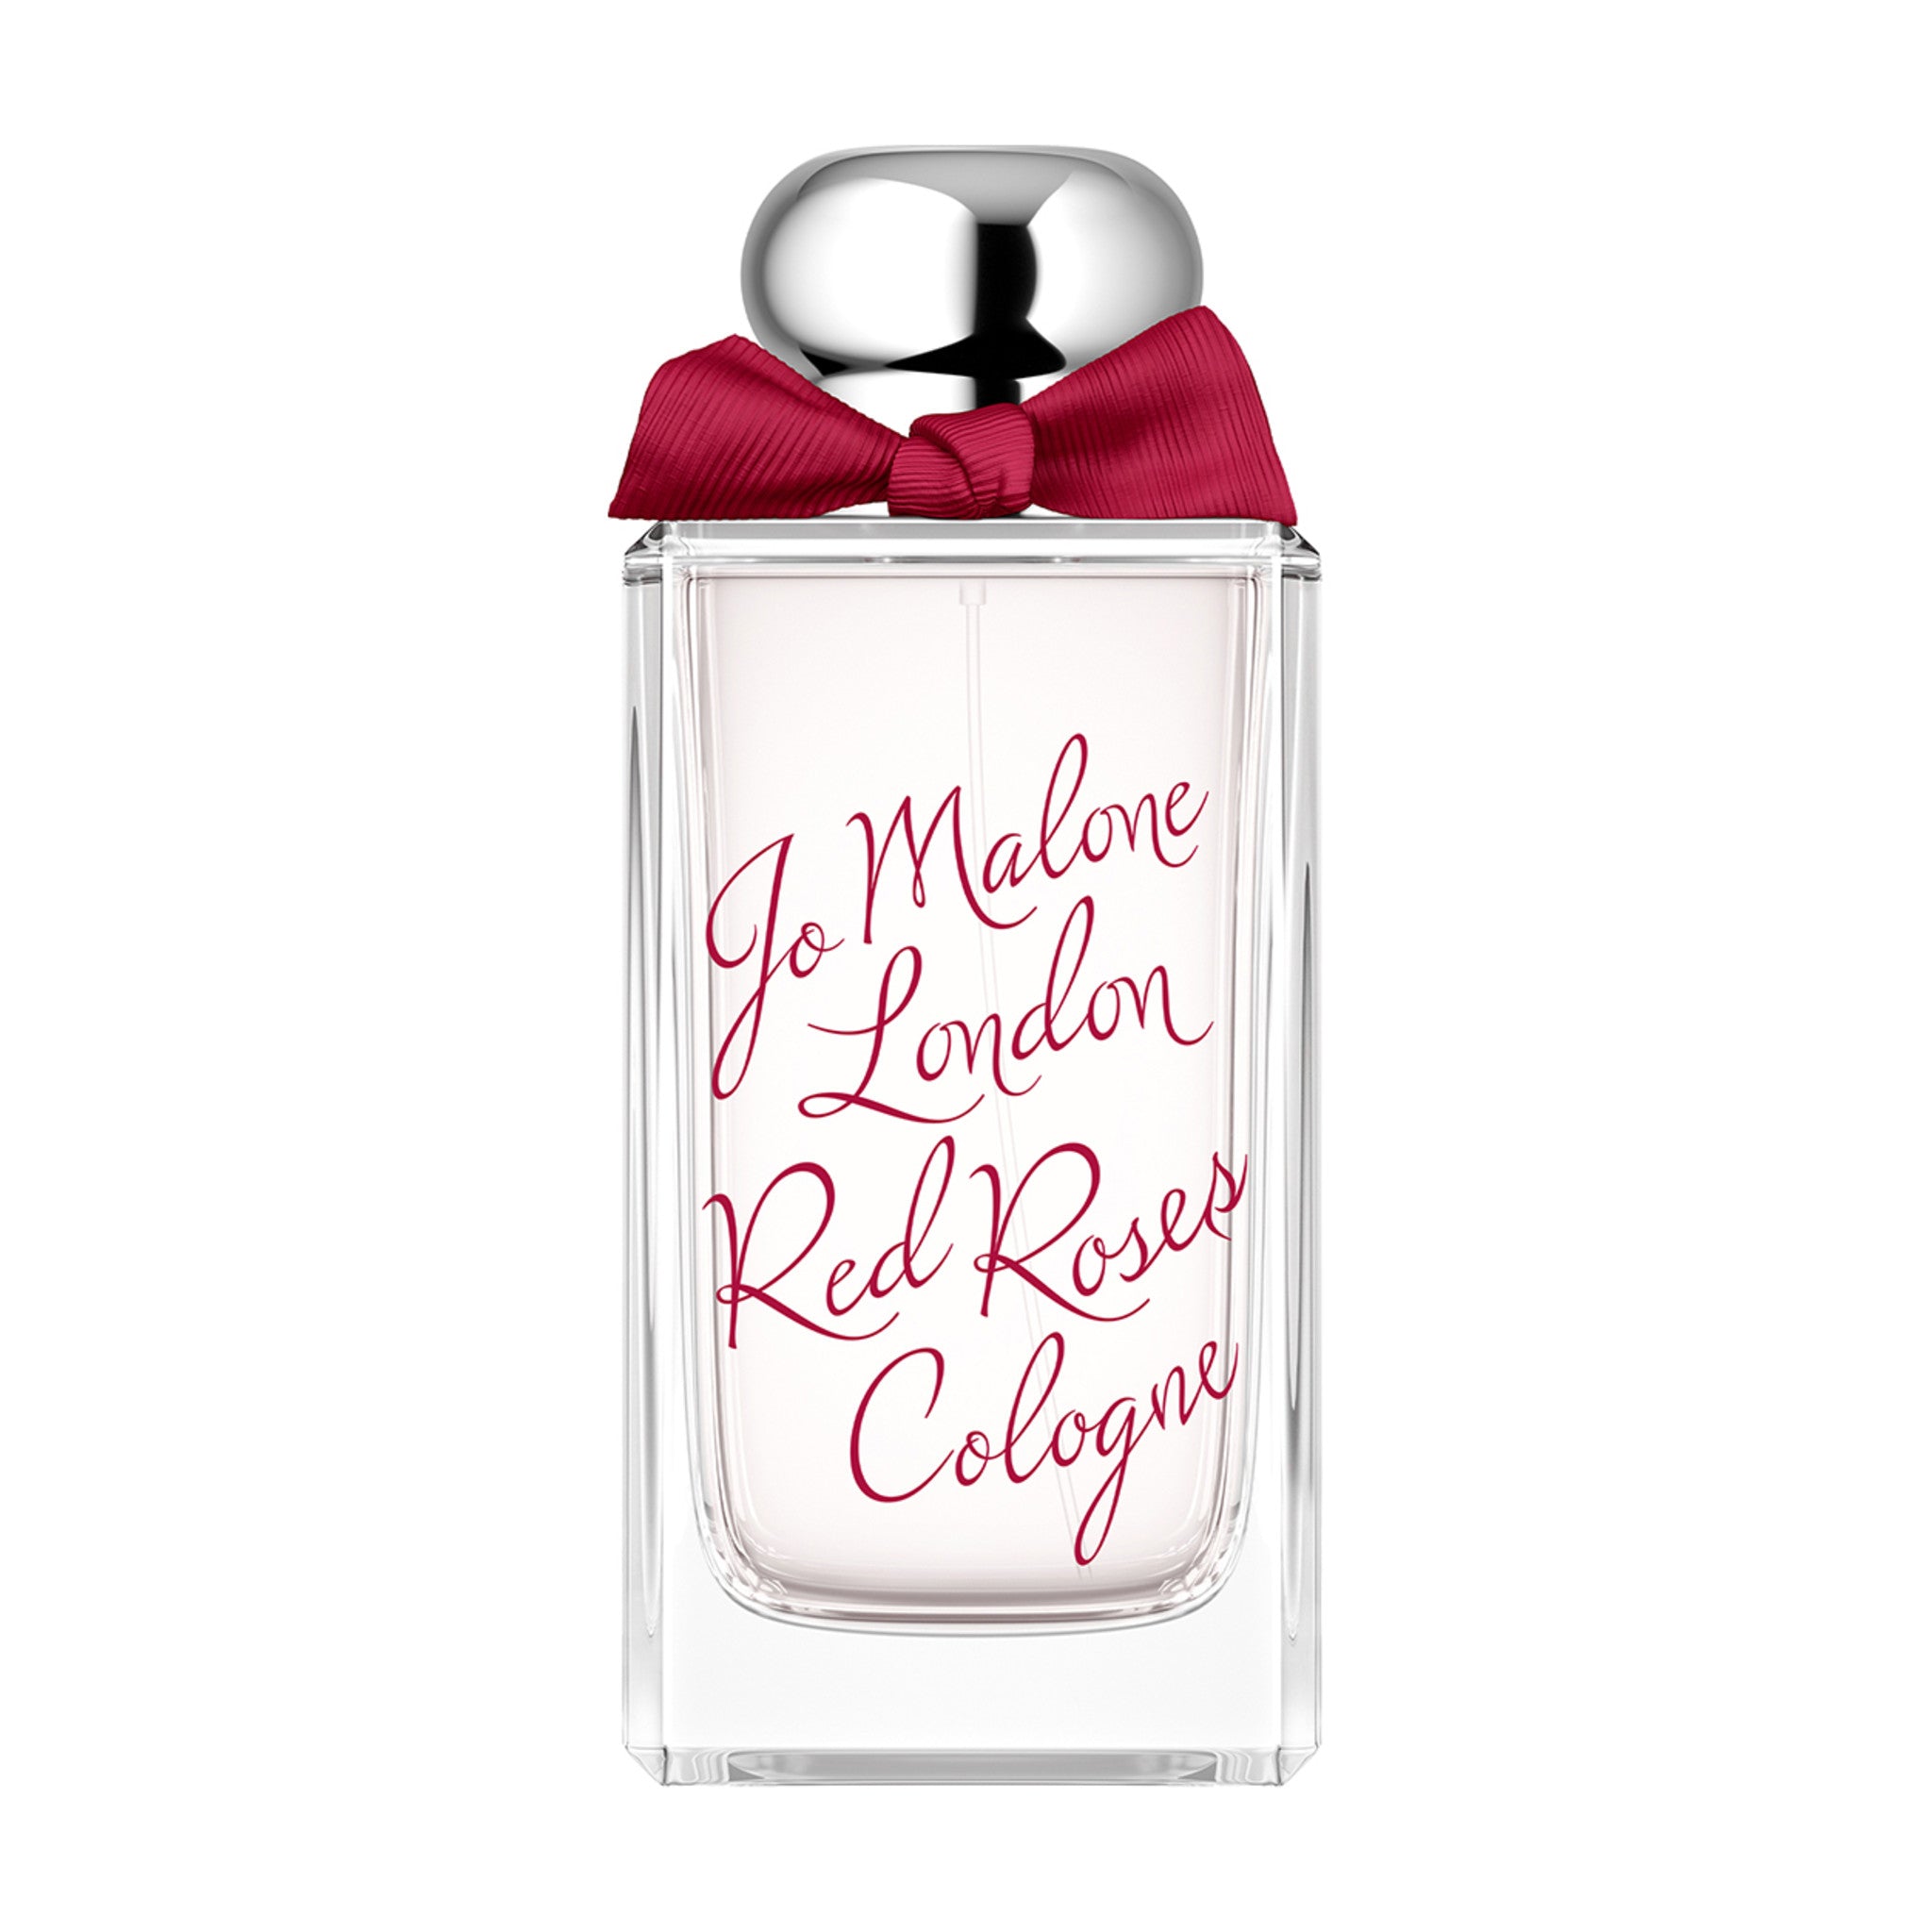 Limited edition Jo Malone London Special-Edition Red Roses Cologne Size variant: 3.4 fl oz | 100 ml main image.